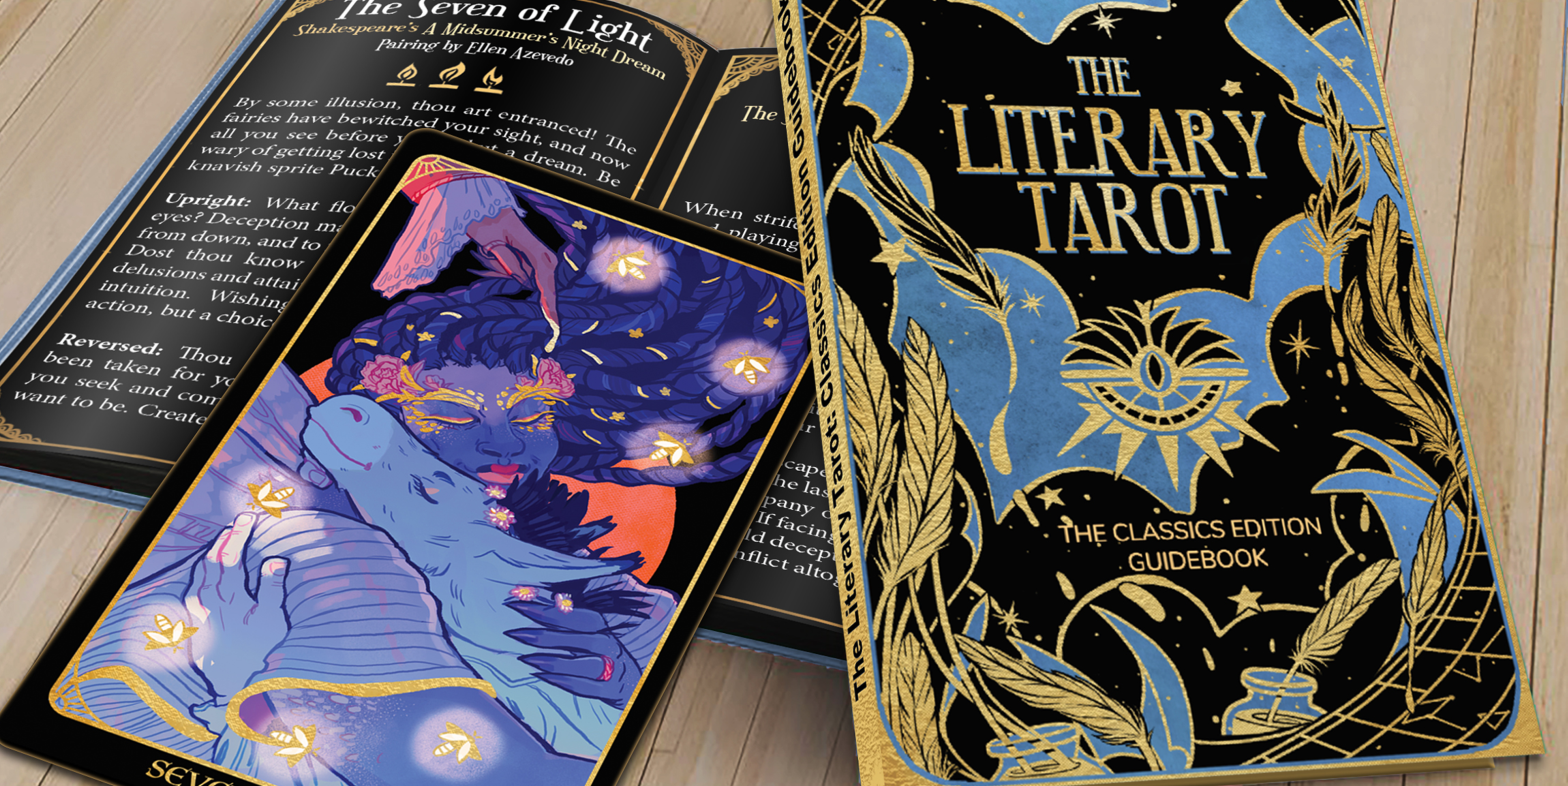 Get ready for a new way to look at the arcana with The Literary Tarot. (Image: Brink Literary Project)